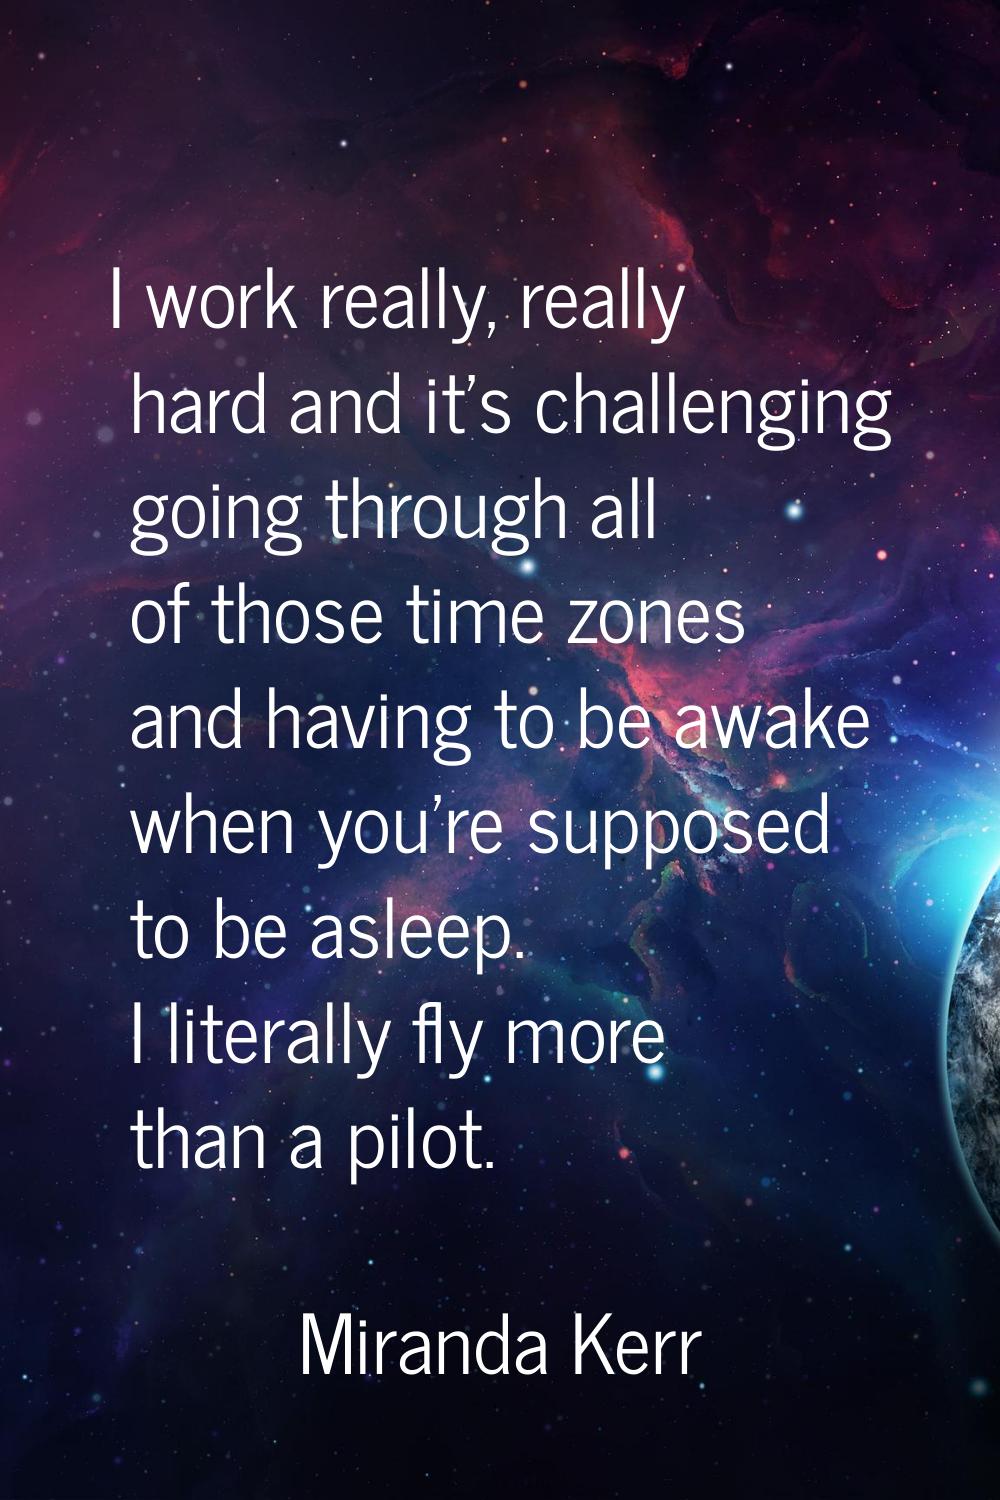 I work really, really hard and it's challenging going through all of those time zones and having to